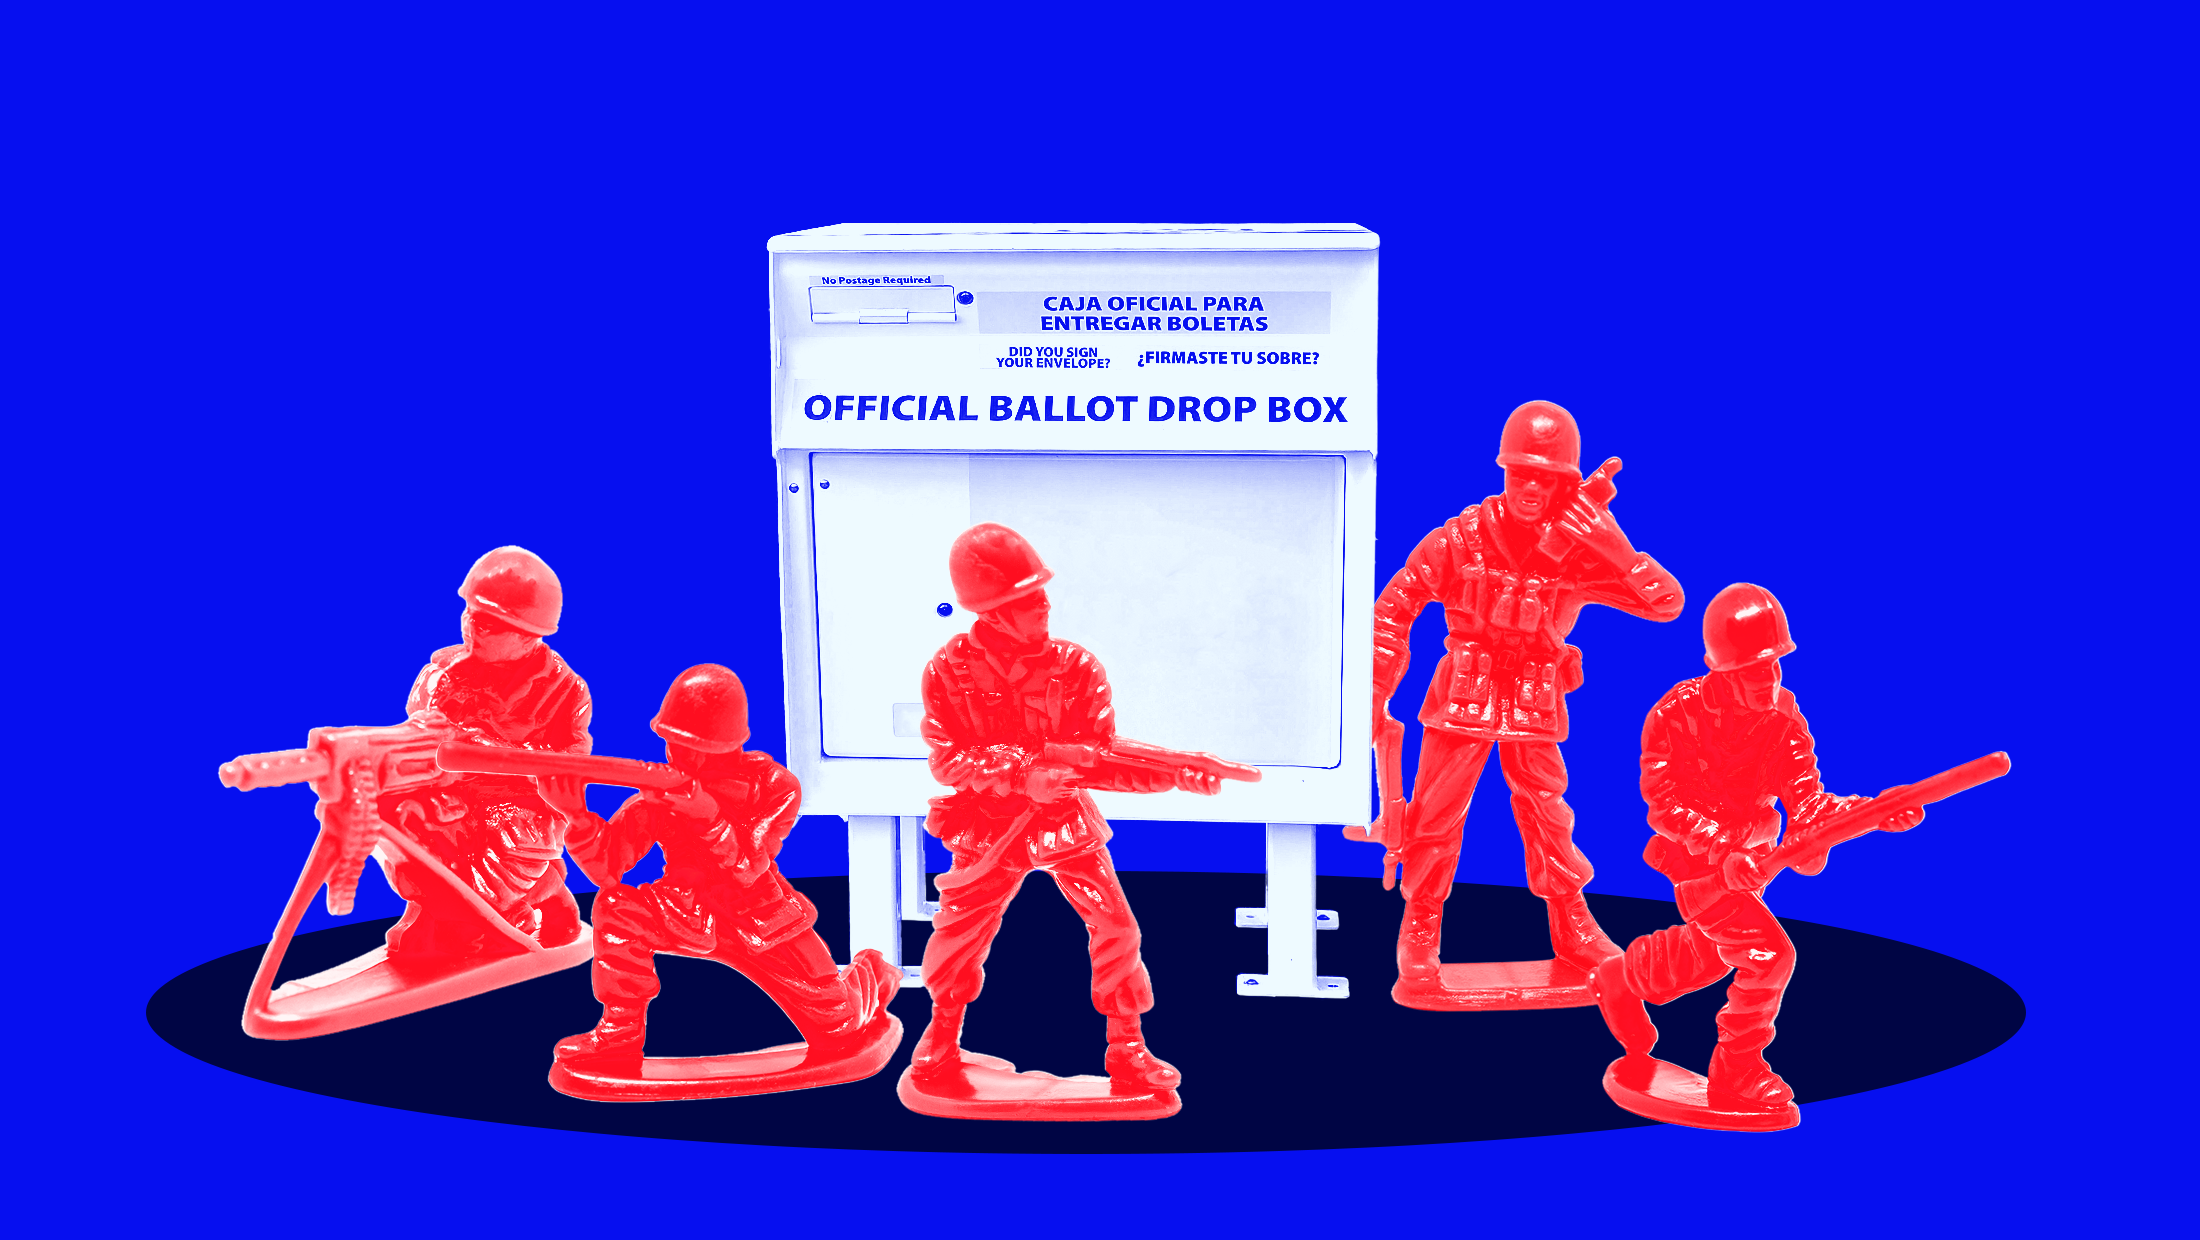 Red toy plastic soldiers gaurding a ballot drop box.